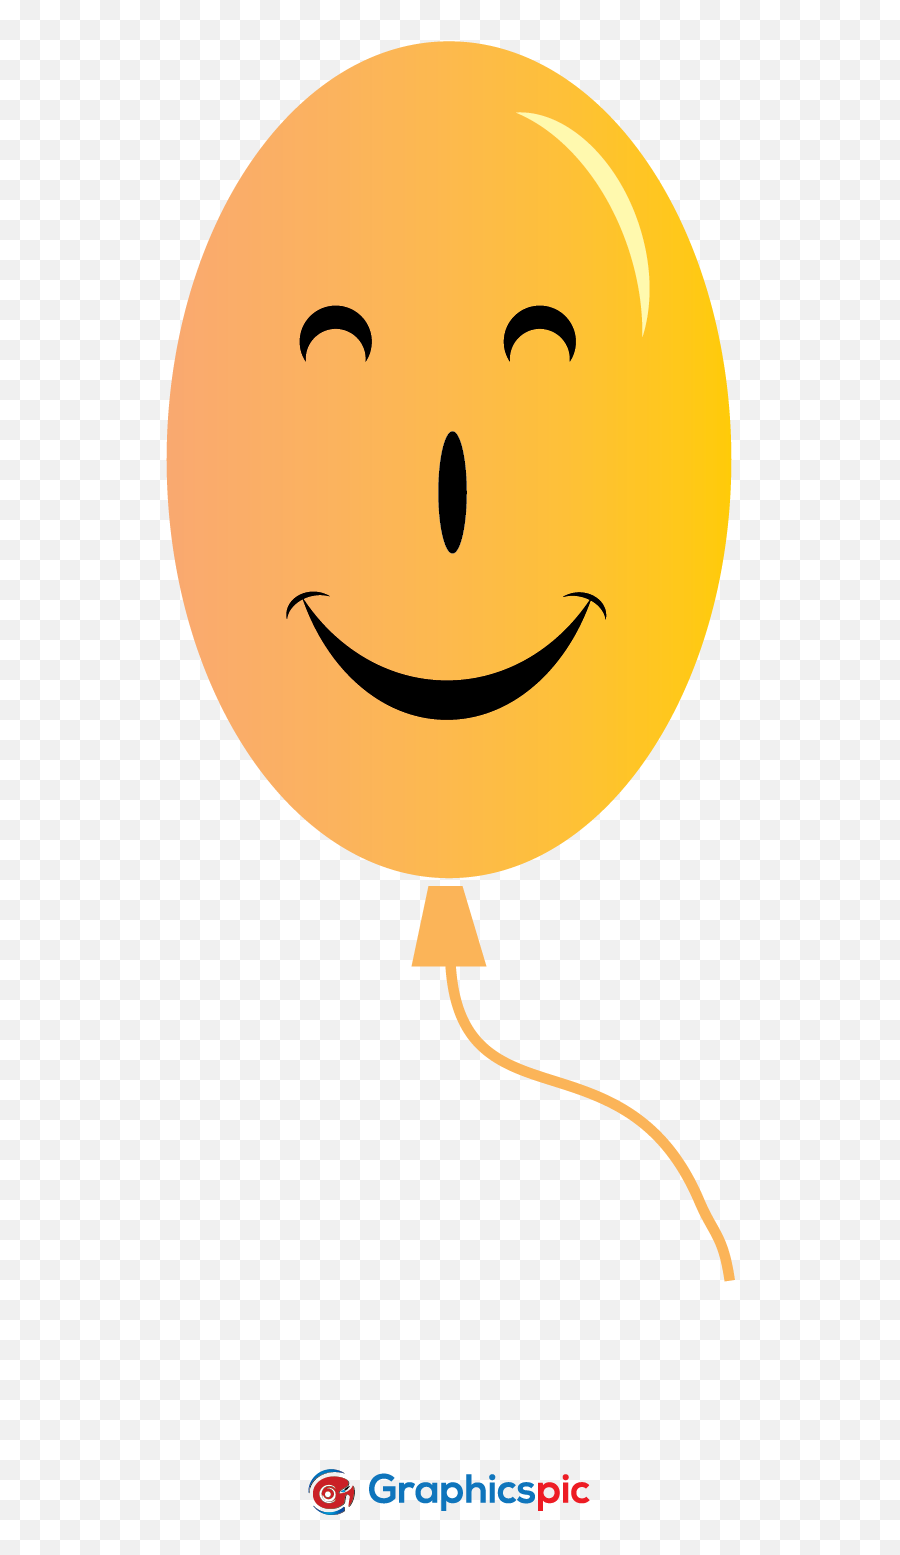 Background Of Smiling Balloon - Free Vector Graphics Pic Happy Emoji,Happiness Png